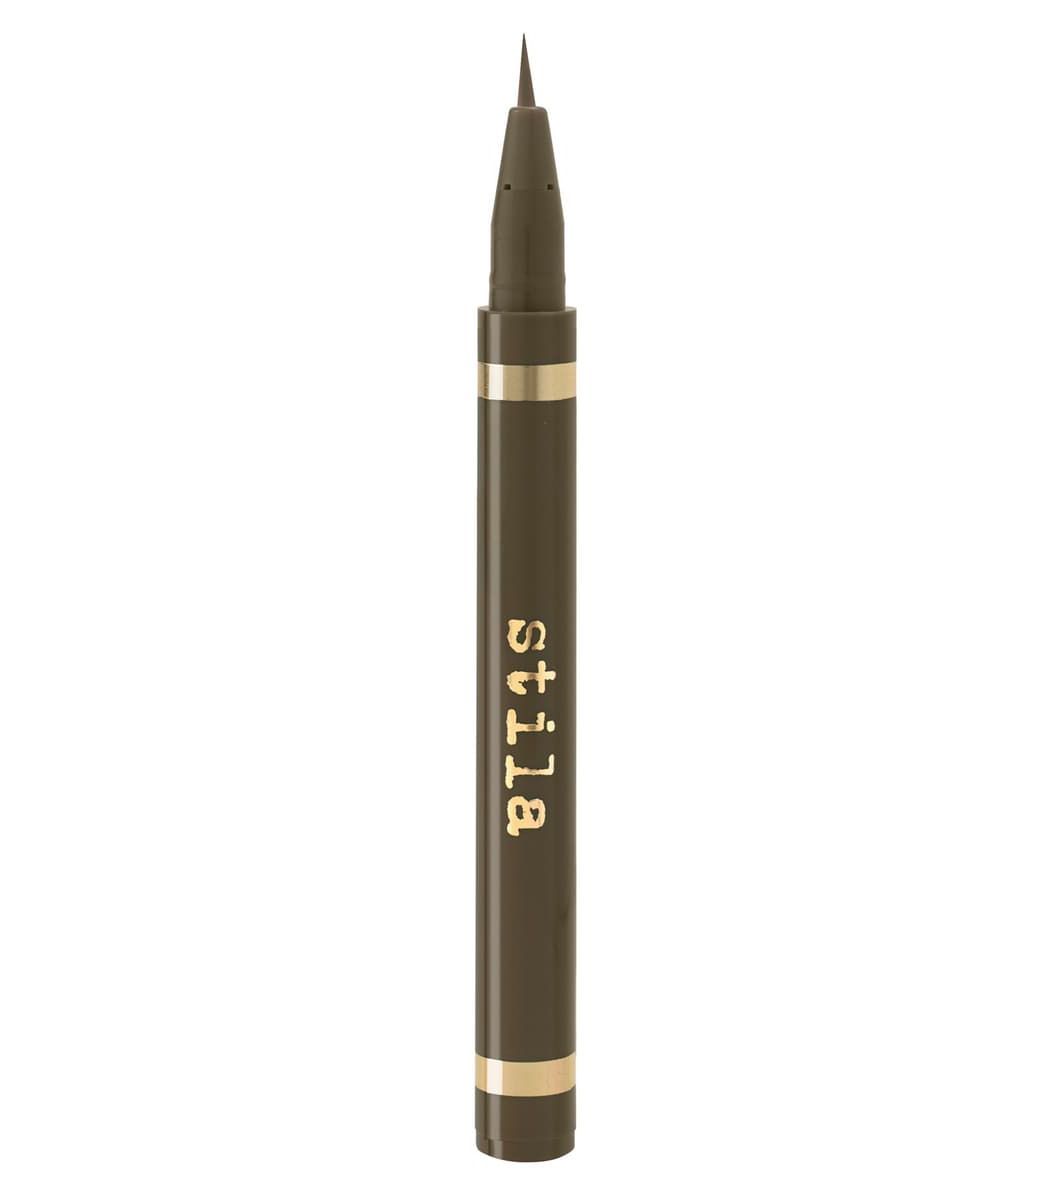 Stila Stay All Day Waterproof Brow Colour